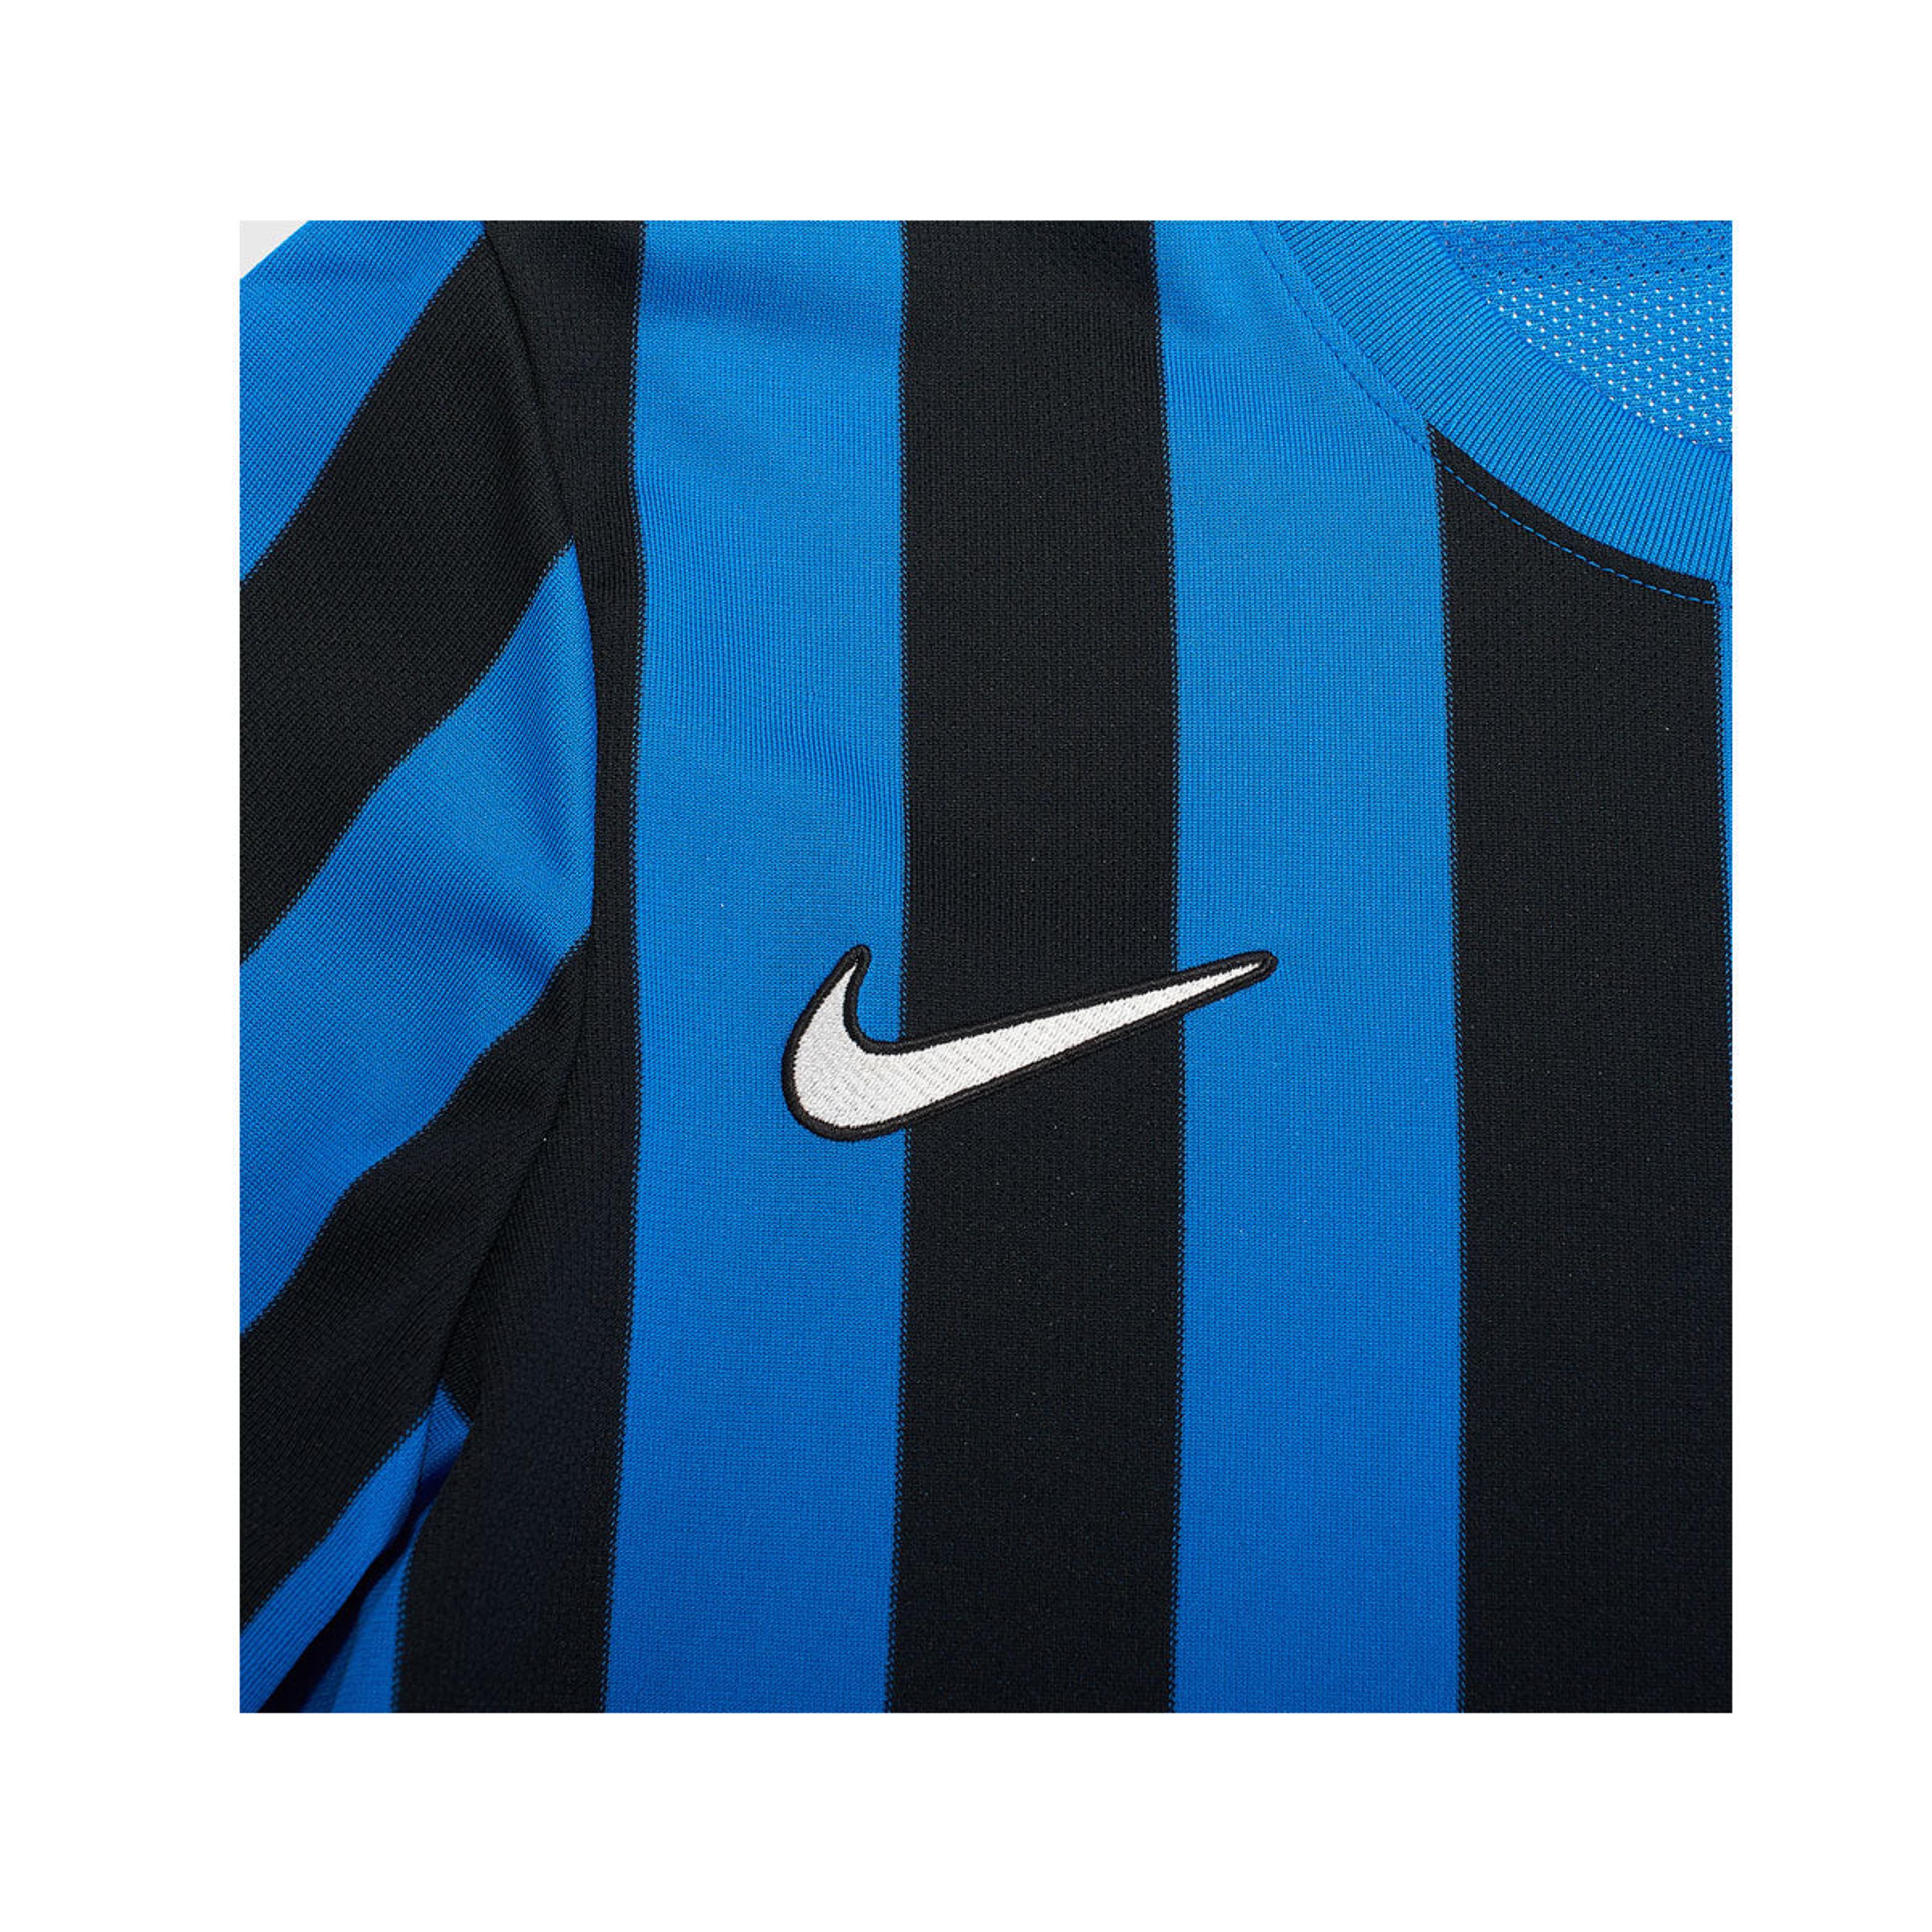 Alternate View 4 of Nike Men's Striped Division 4 Jersey